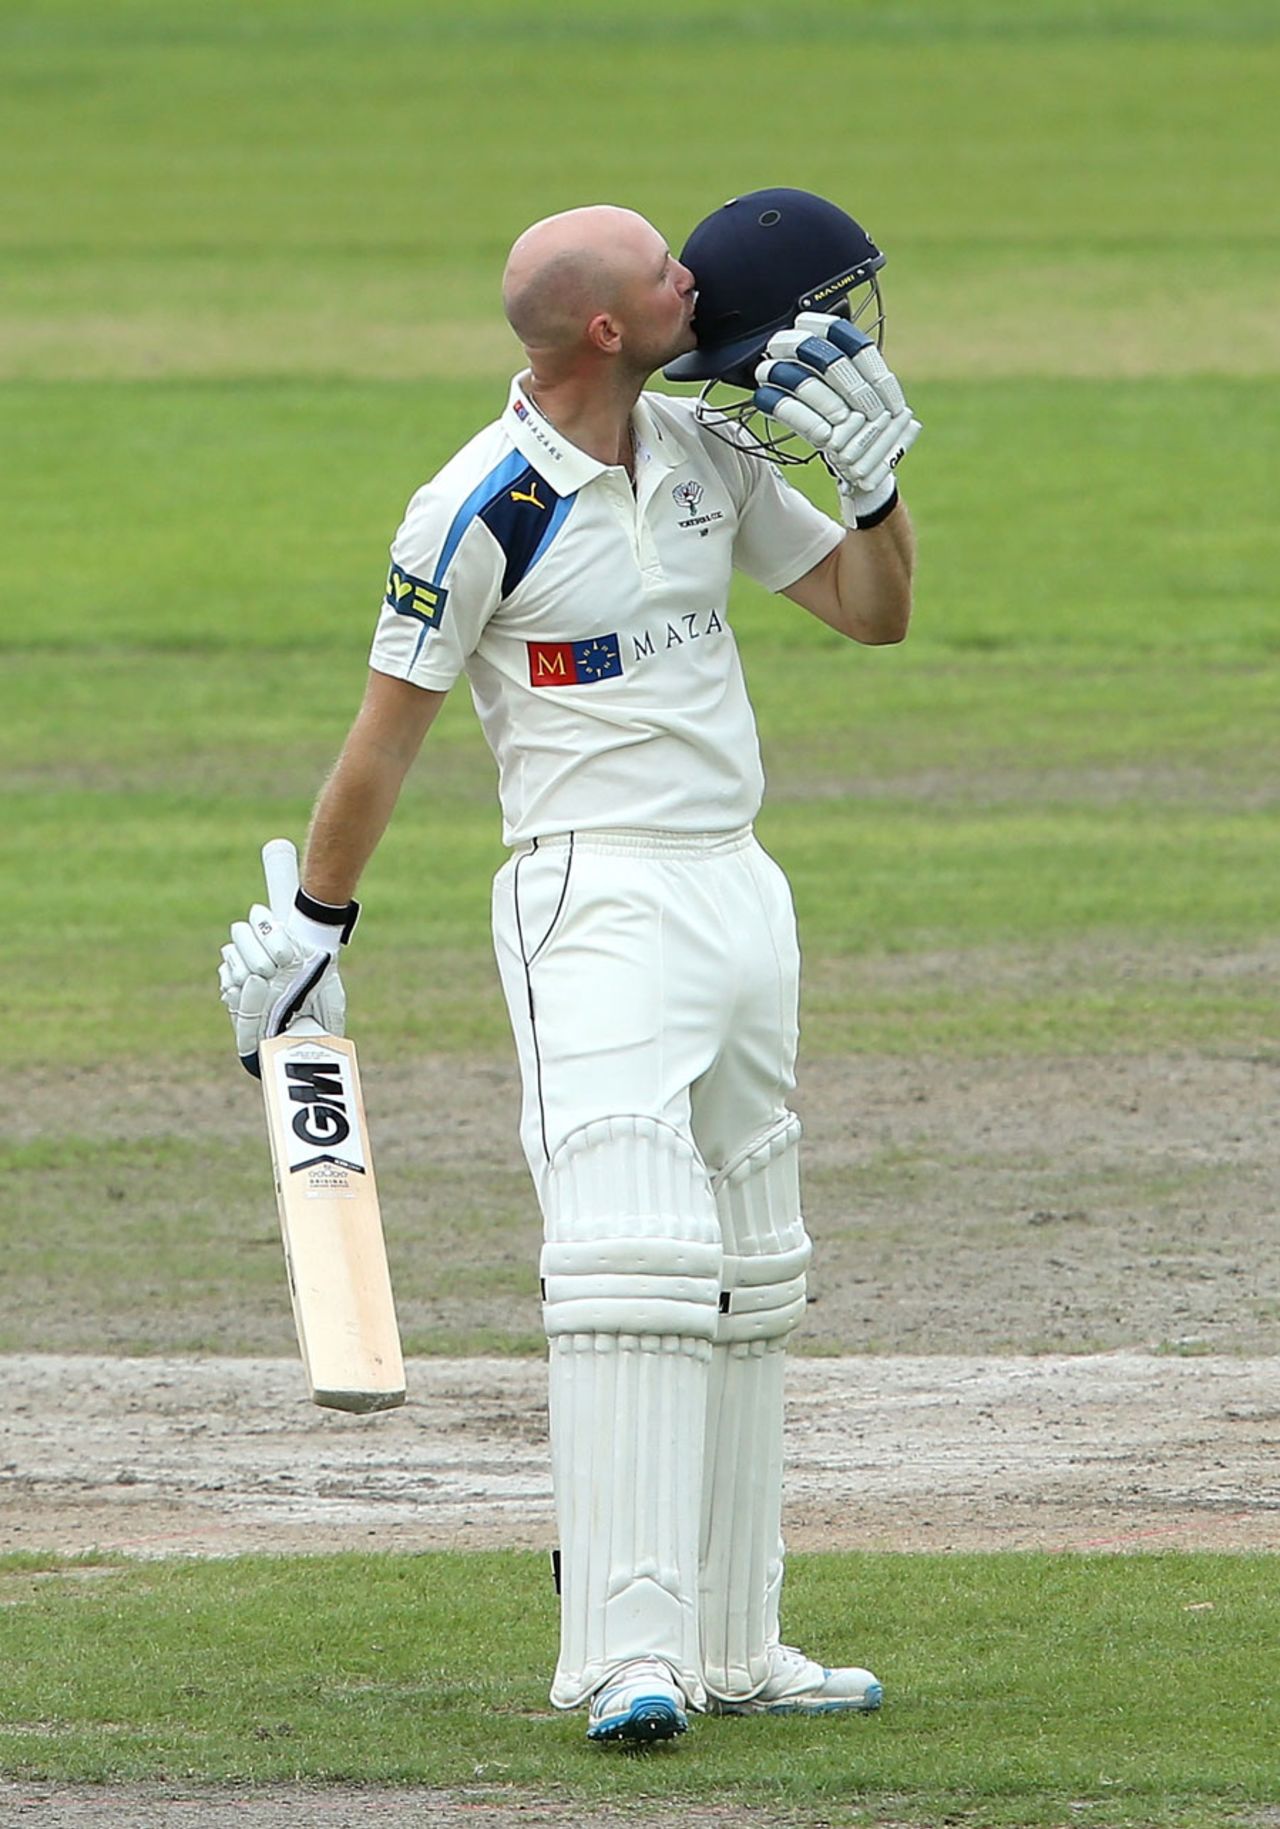 Adam Lyth kisses the badge on reaching his hundred, Lancashire v Yorkshire, County Championship, Division One, Old Trafford, September 1, 2014